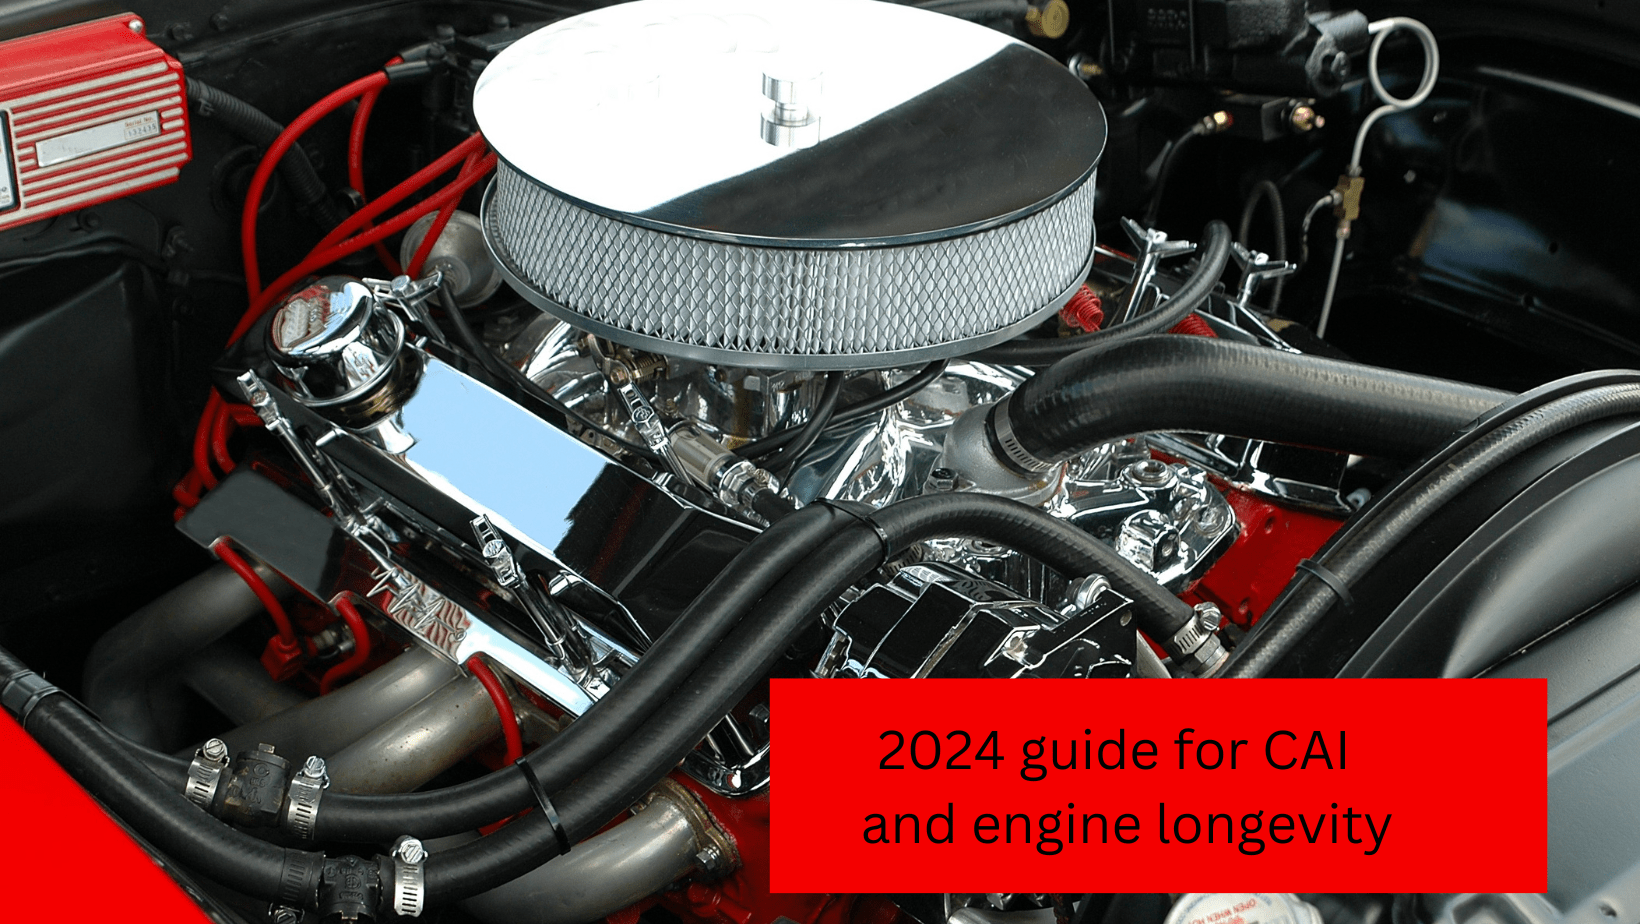 Impact on engine longevity differs from car to car